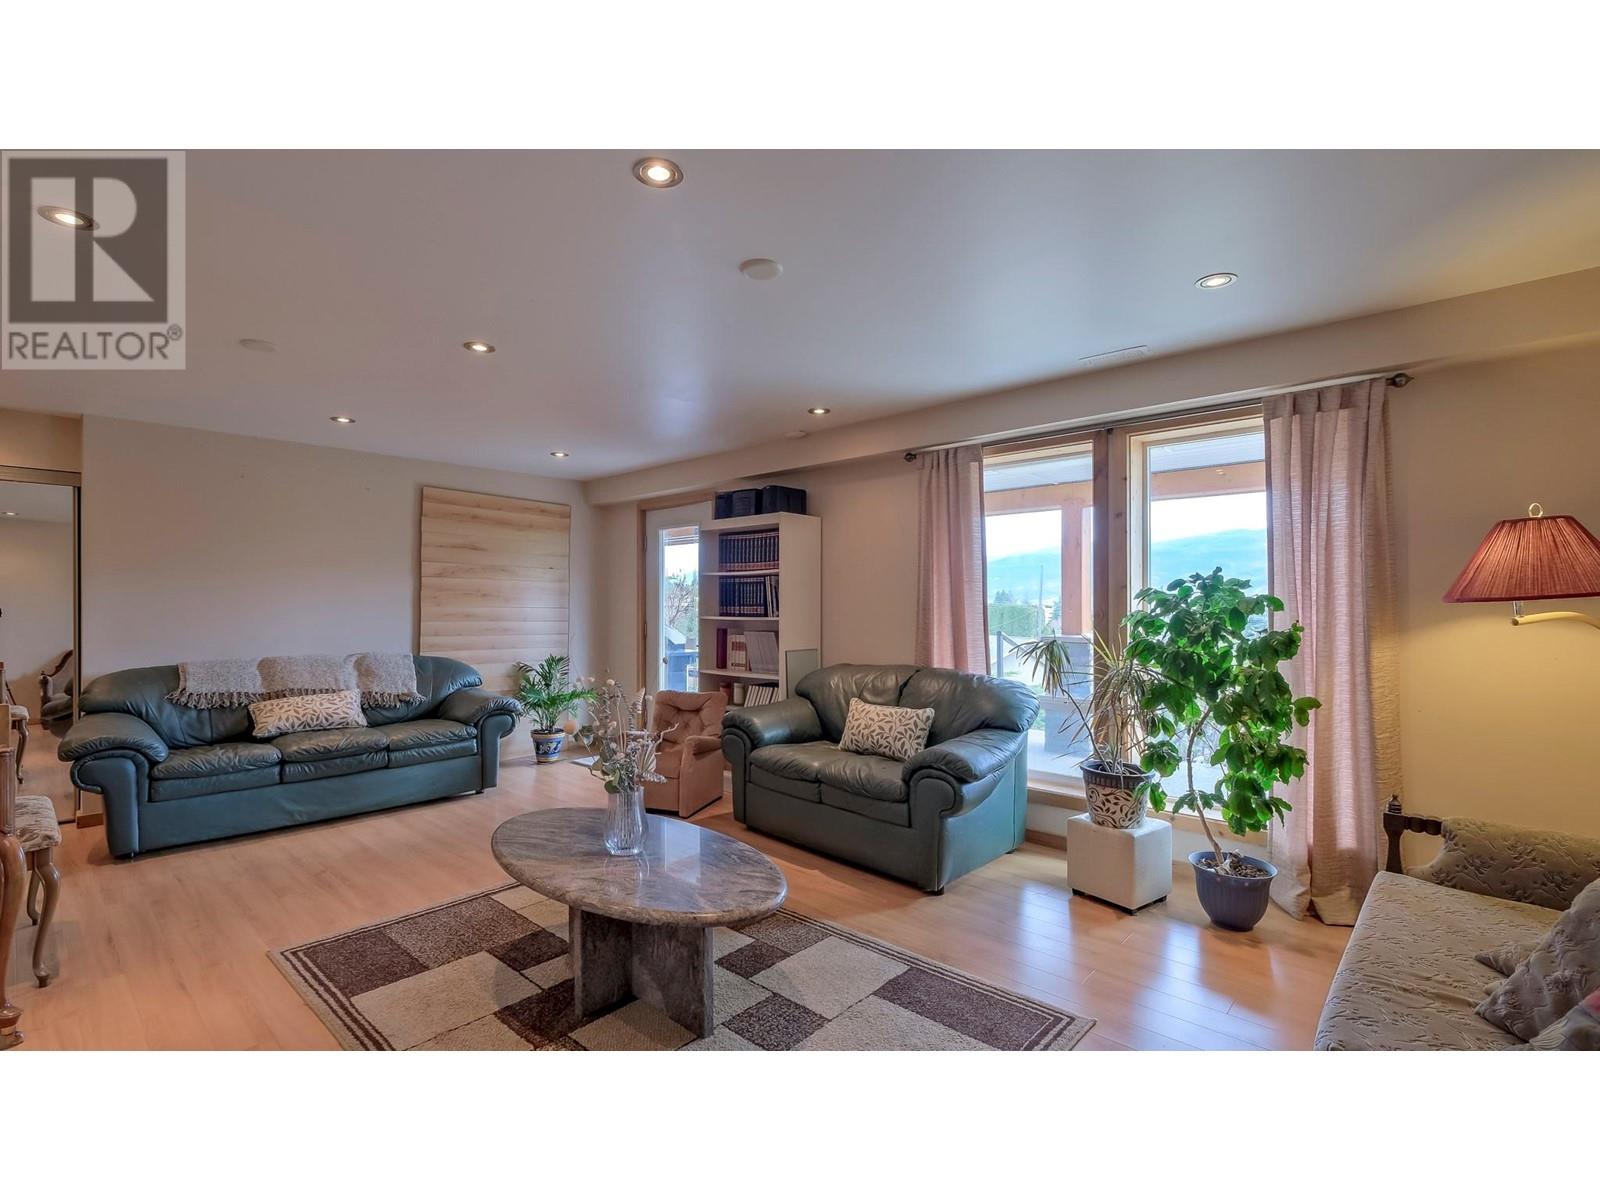 404 West Bench Drive, Penticton, British Columbia  V2A 8X9 - Photo 42 - 10311234